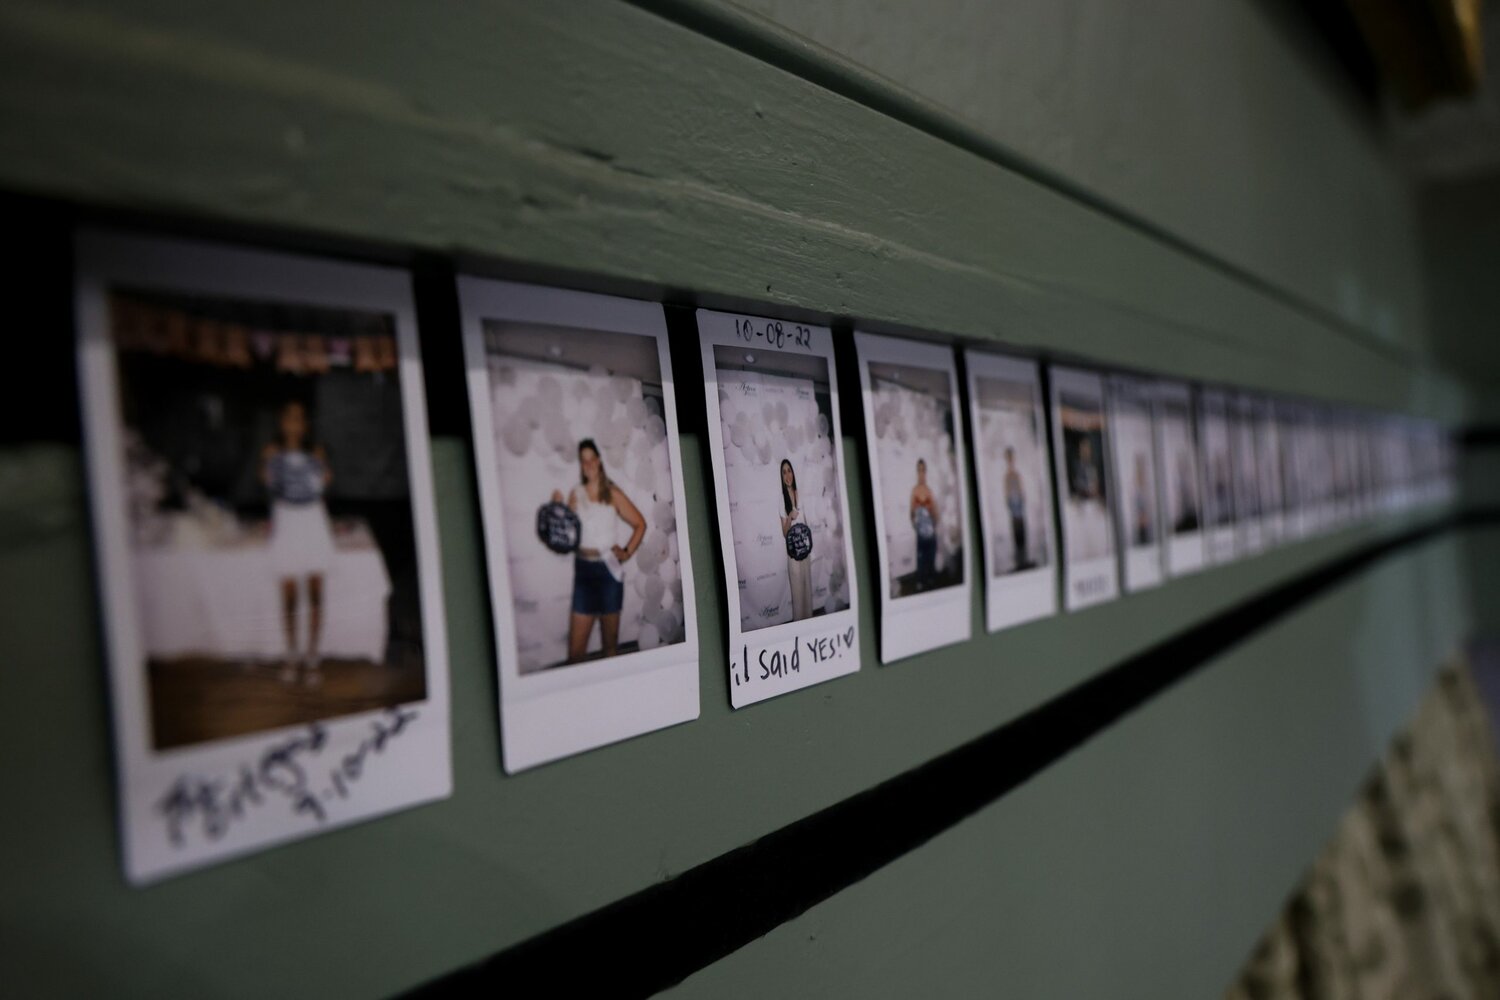 Photos of brides who bought their dresses from Azteca Bridal in Phoenix are displayed at the store on Nov. 21, 2023. (Photo by Sam Volante/Cronkite News)